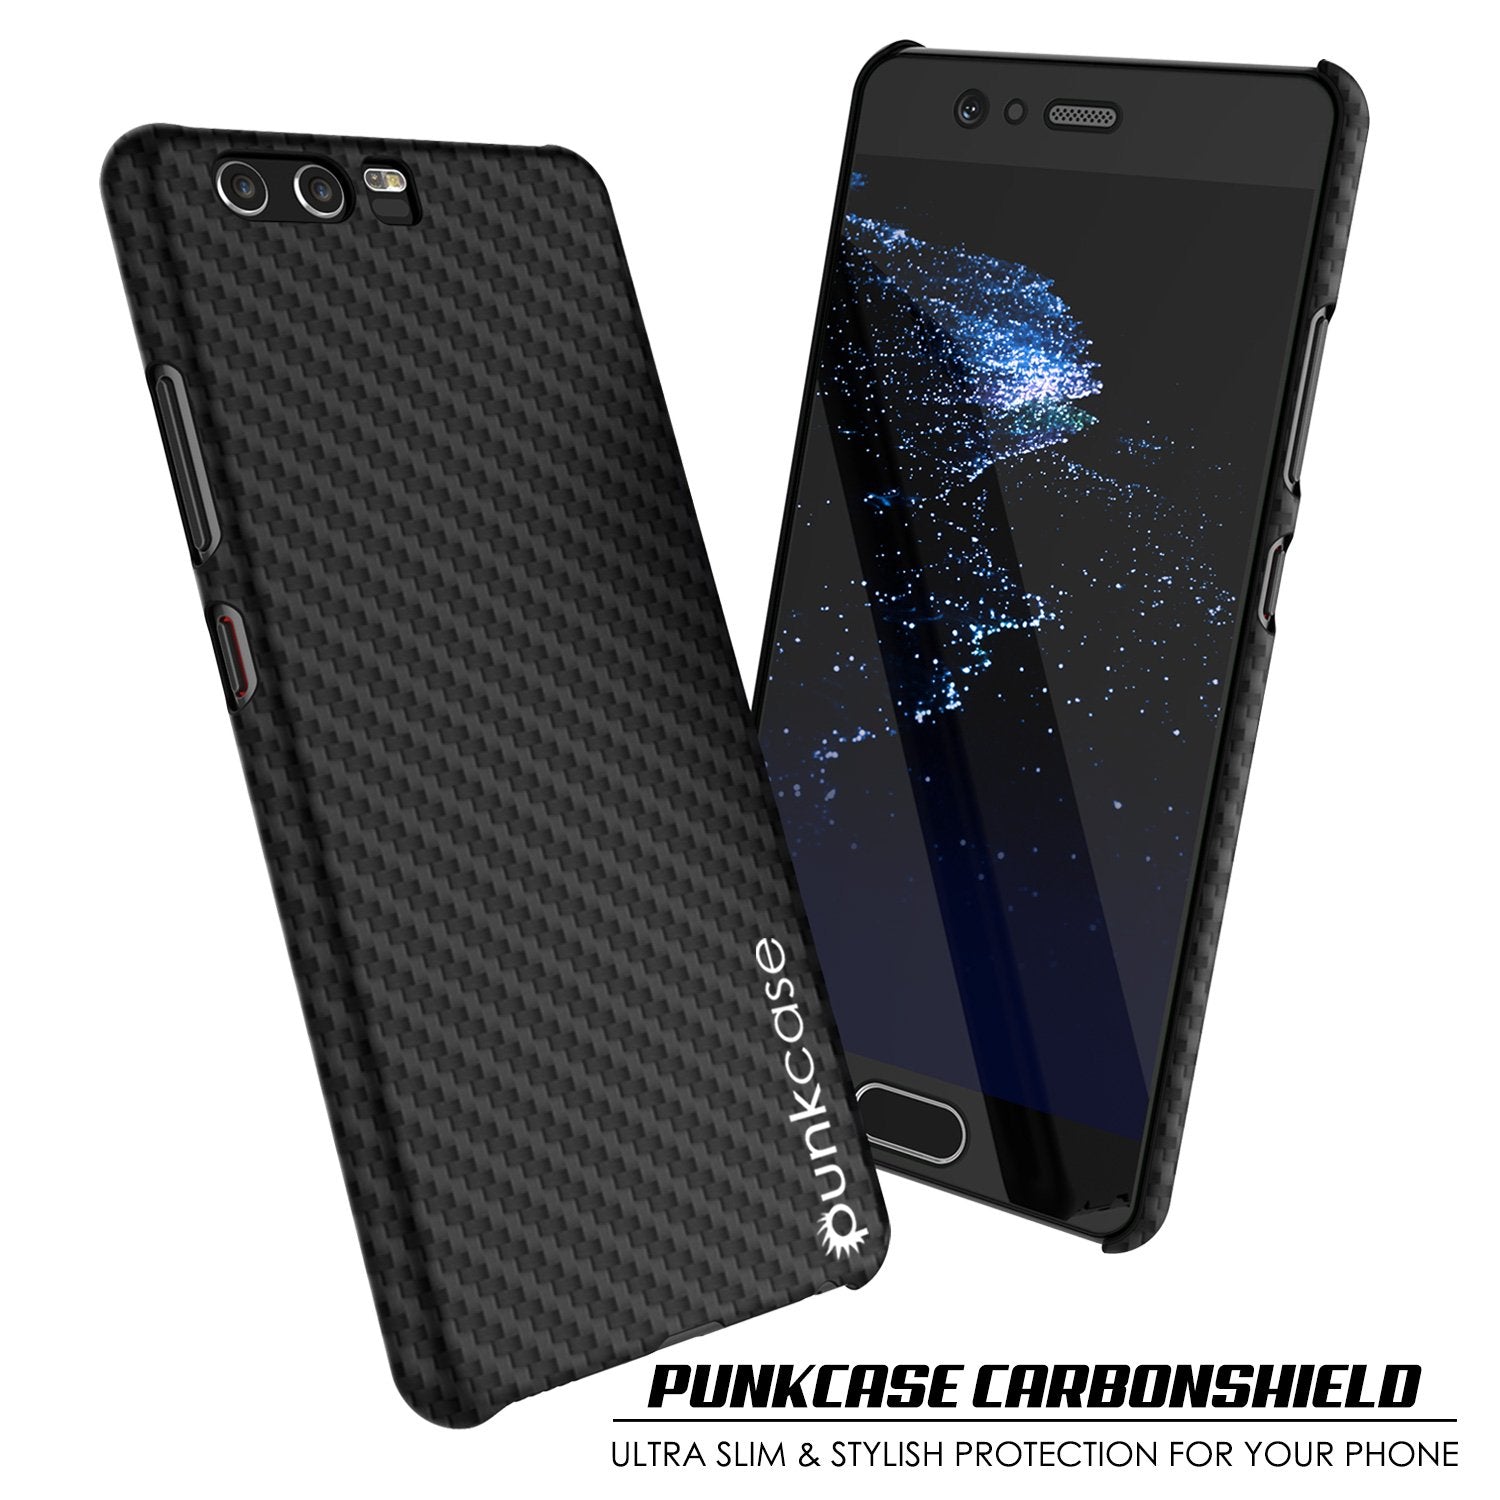 Huawei P10 Case, Punkcase CarbonShield, Heavy Duty PU Leather Cover